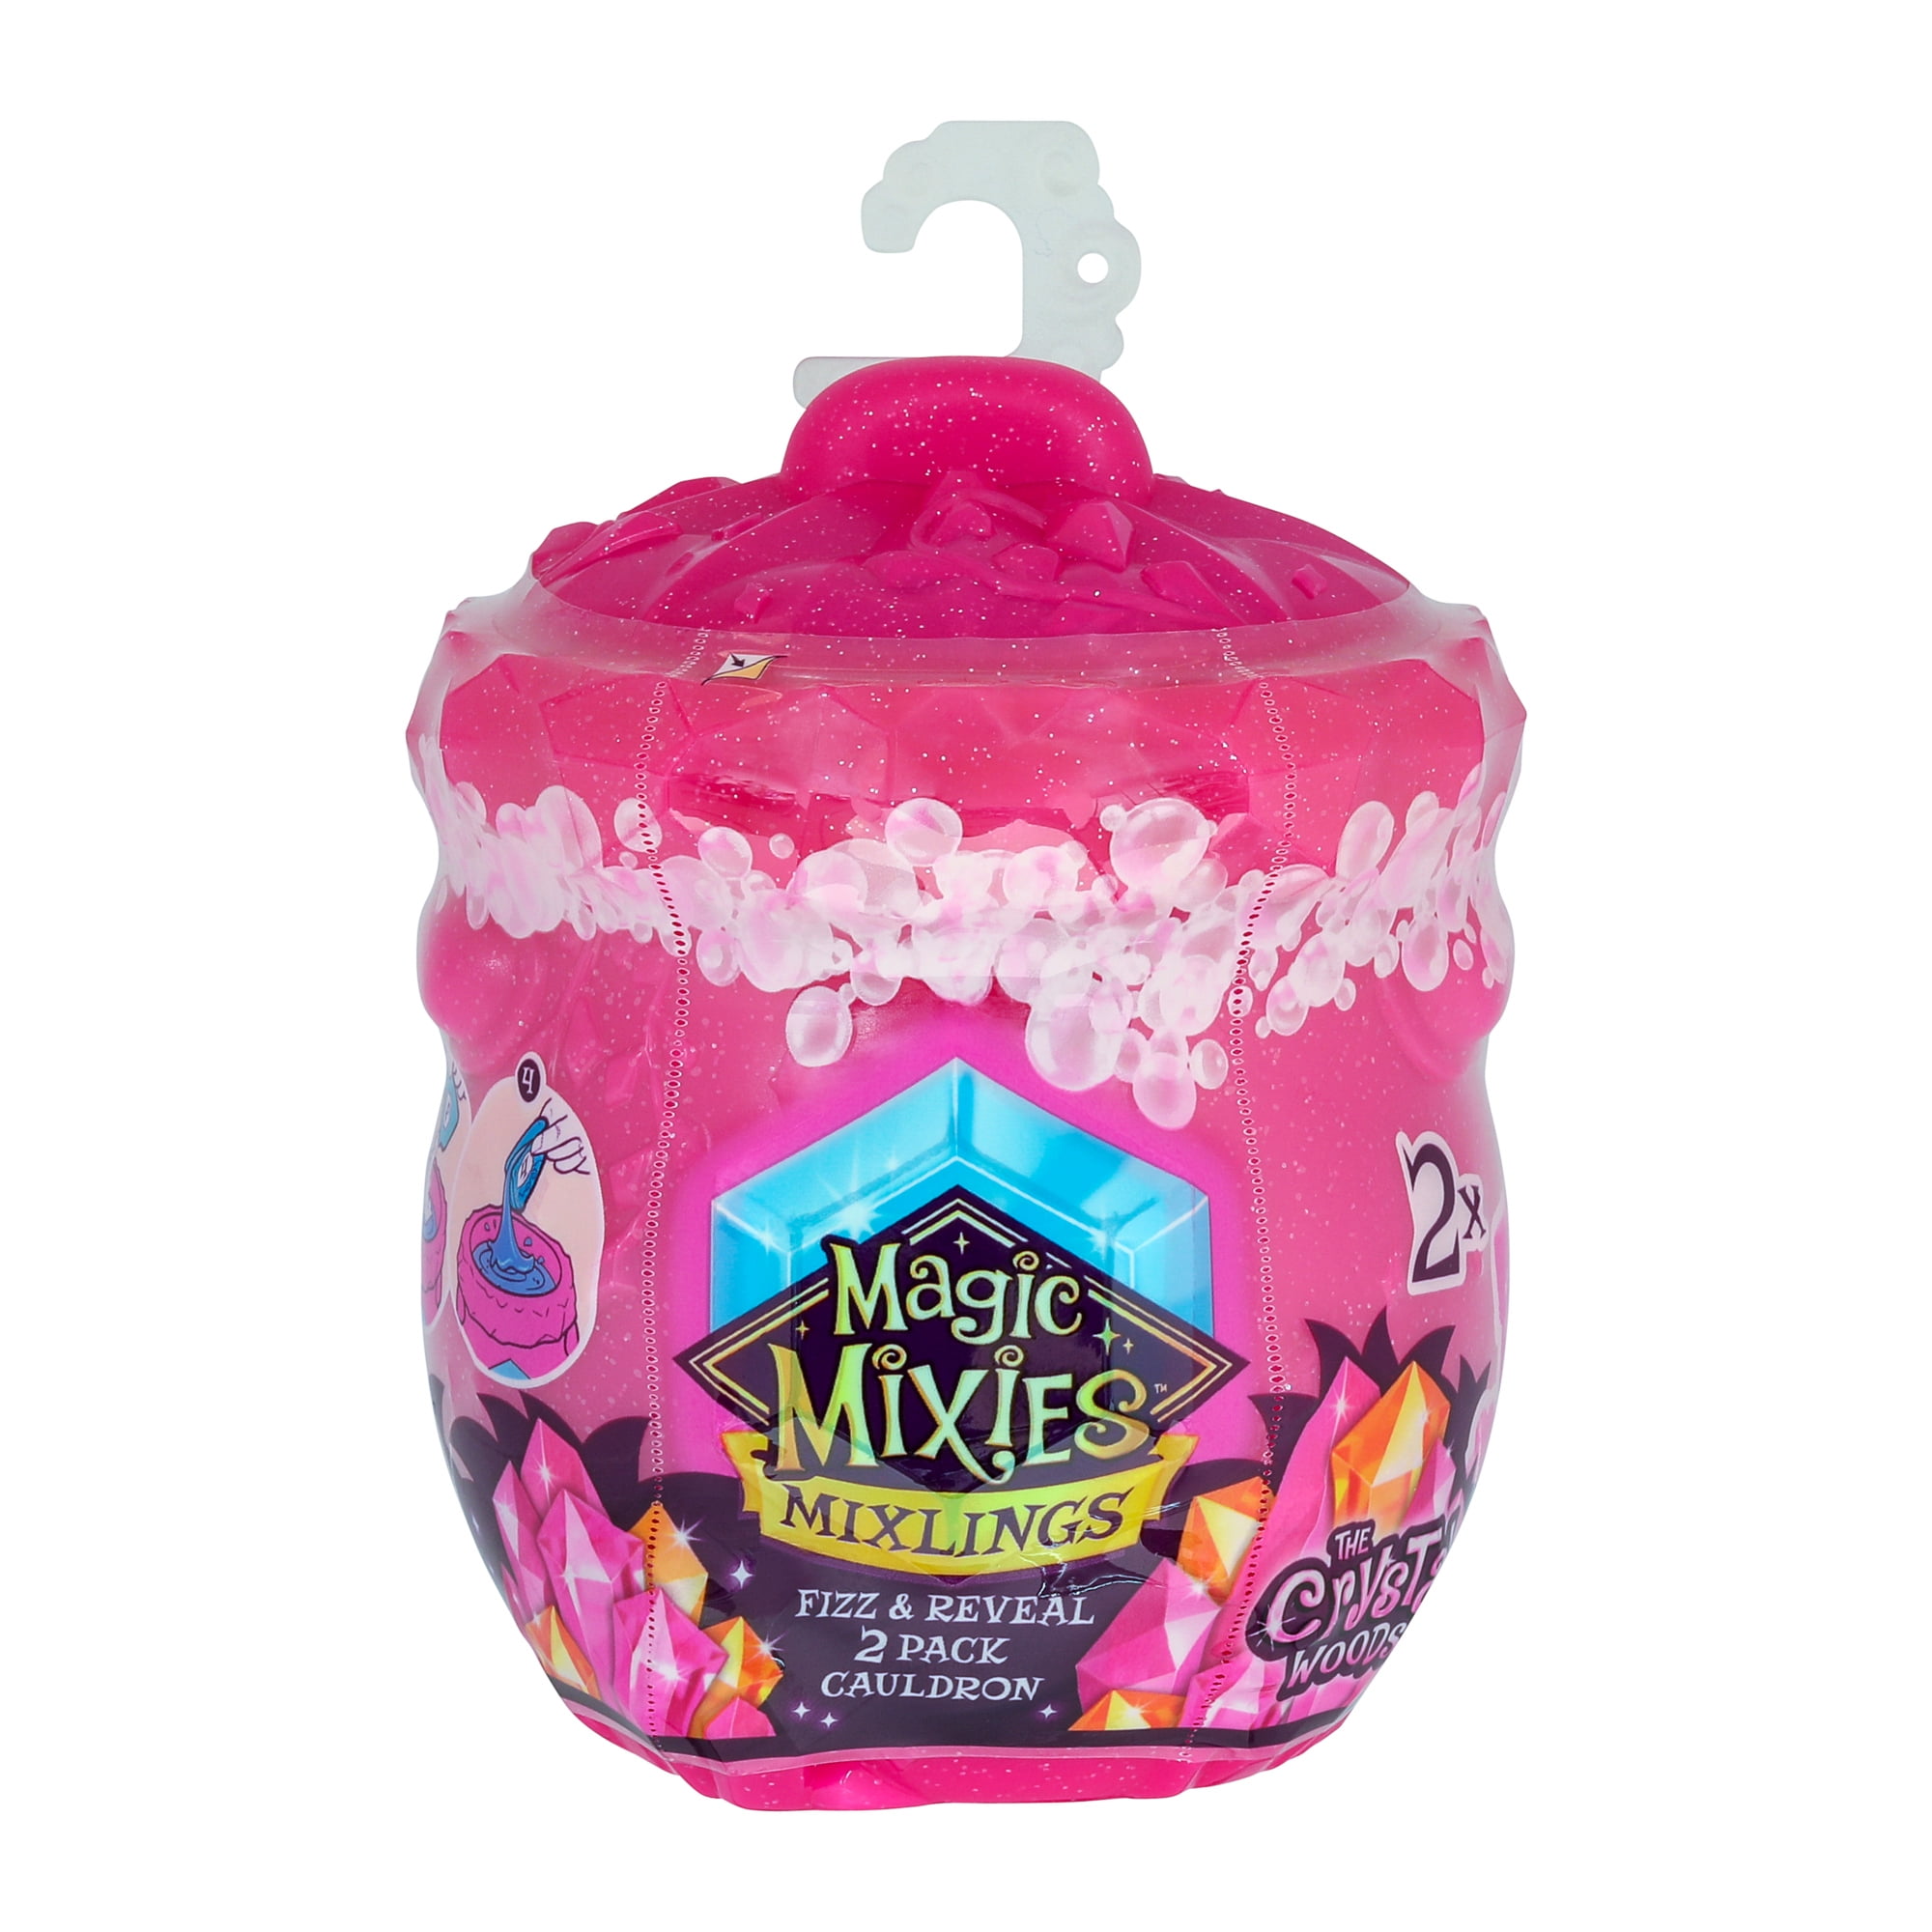 Magic Mixies Mixlings Fizz & Reveal 2 Pack Pink Cauldron, 40+ to Collect,  Ages 5+ 